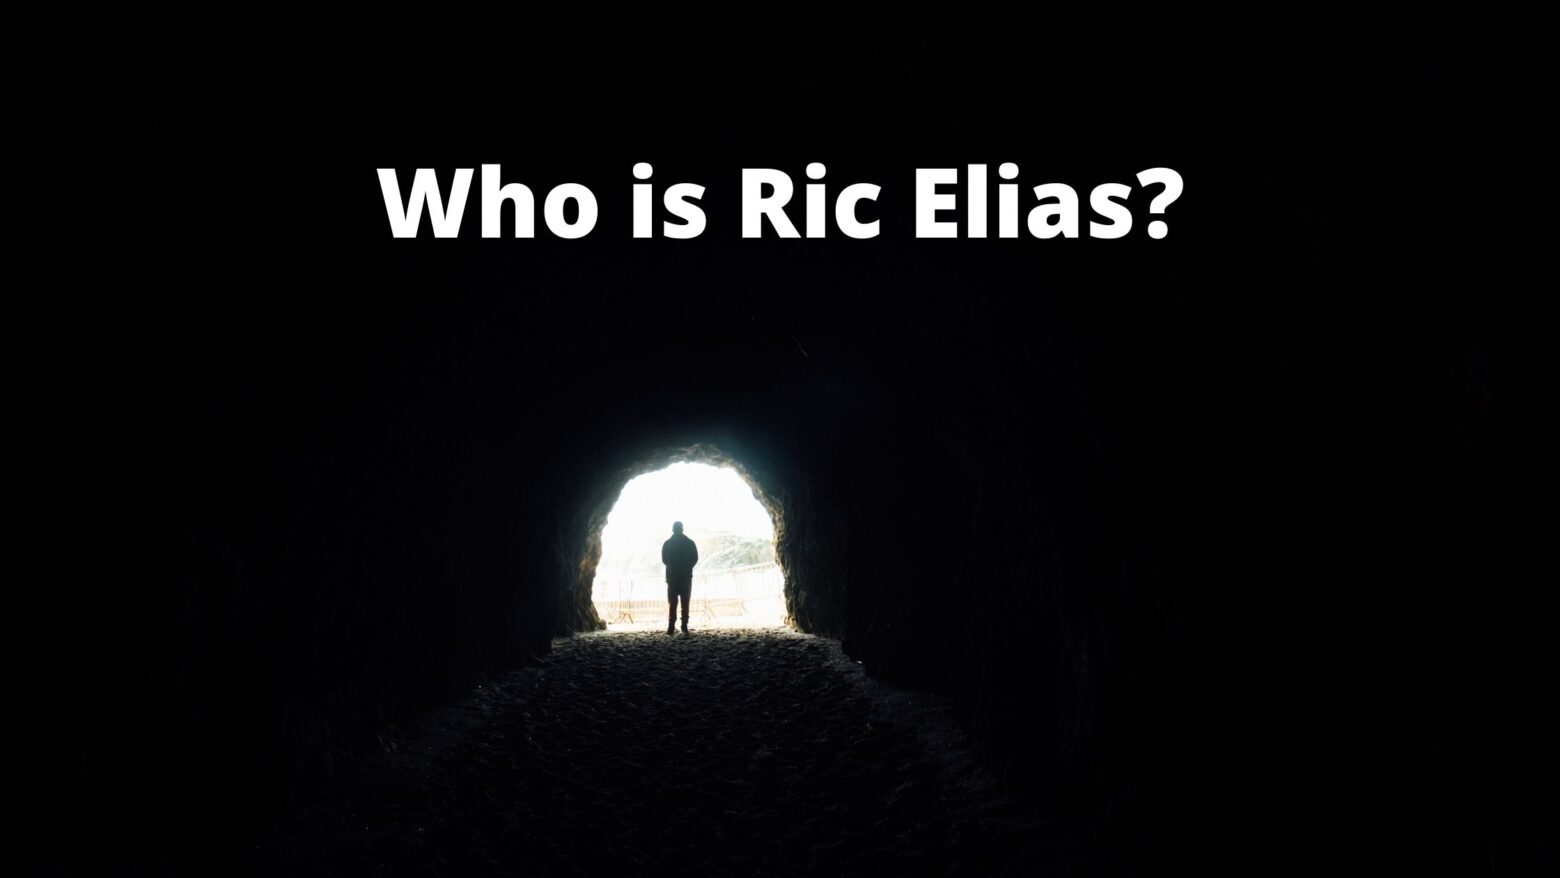 Who is Ric Elias?